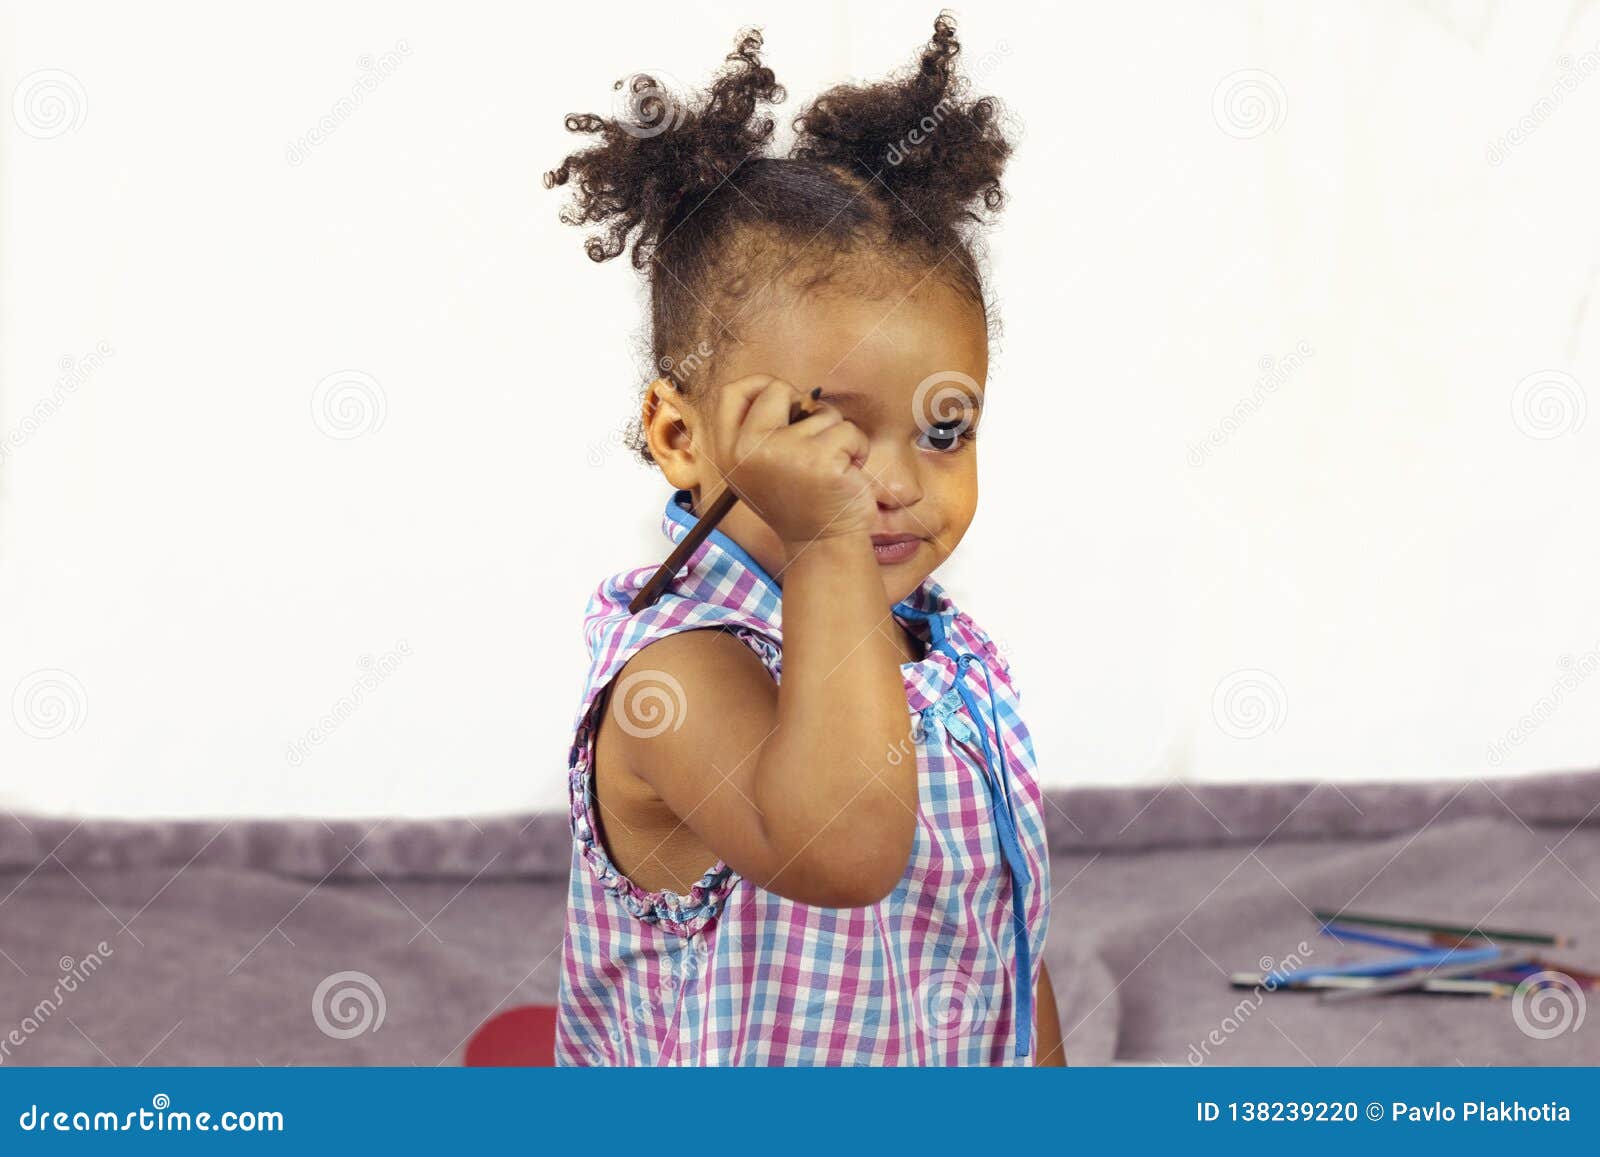 African American Child With Curly Hair Stock Photo Image